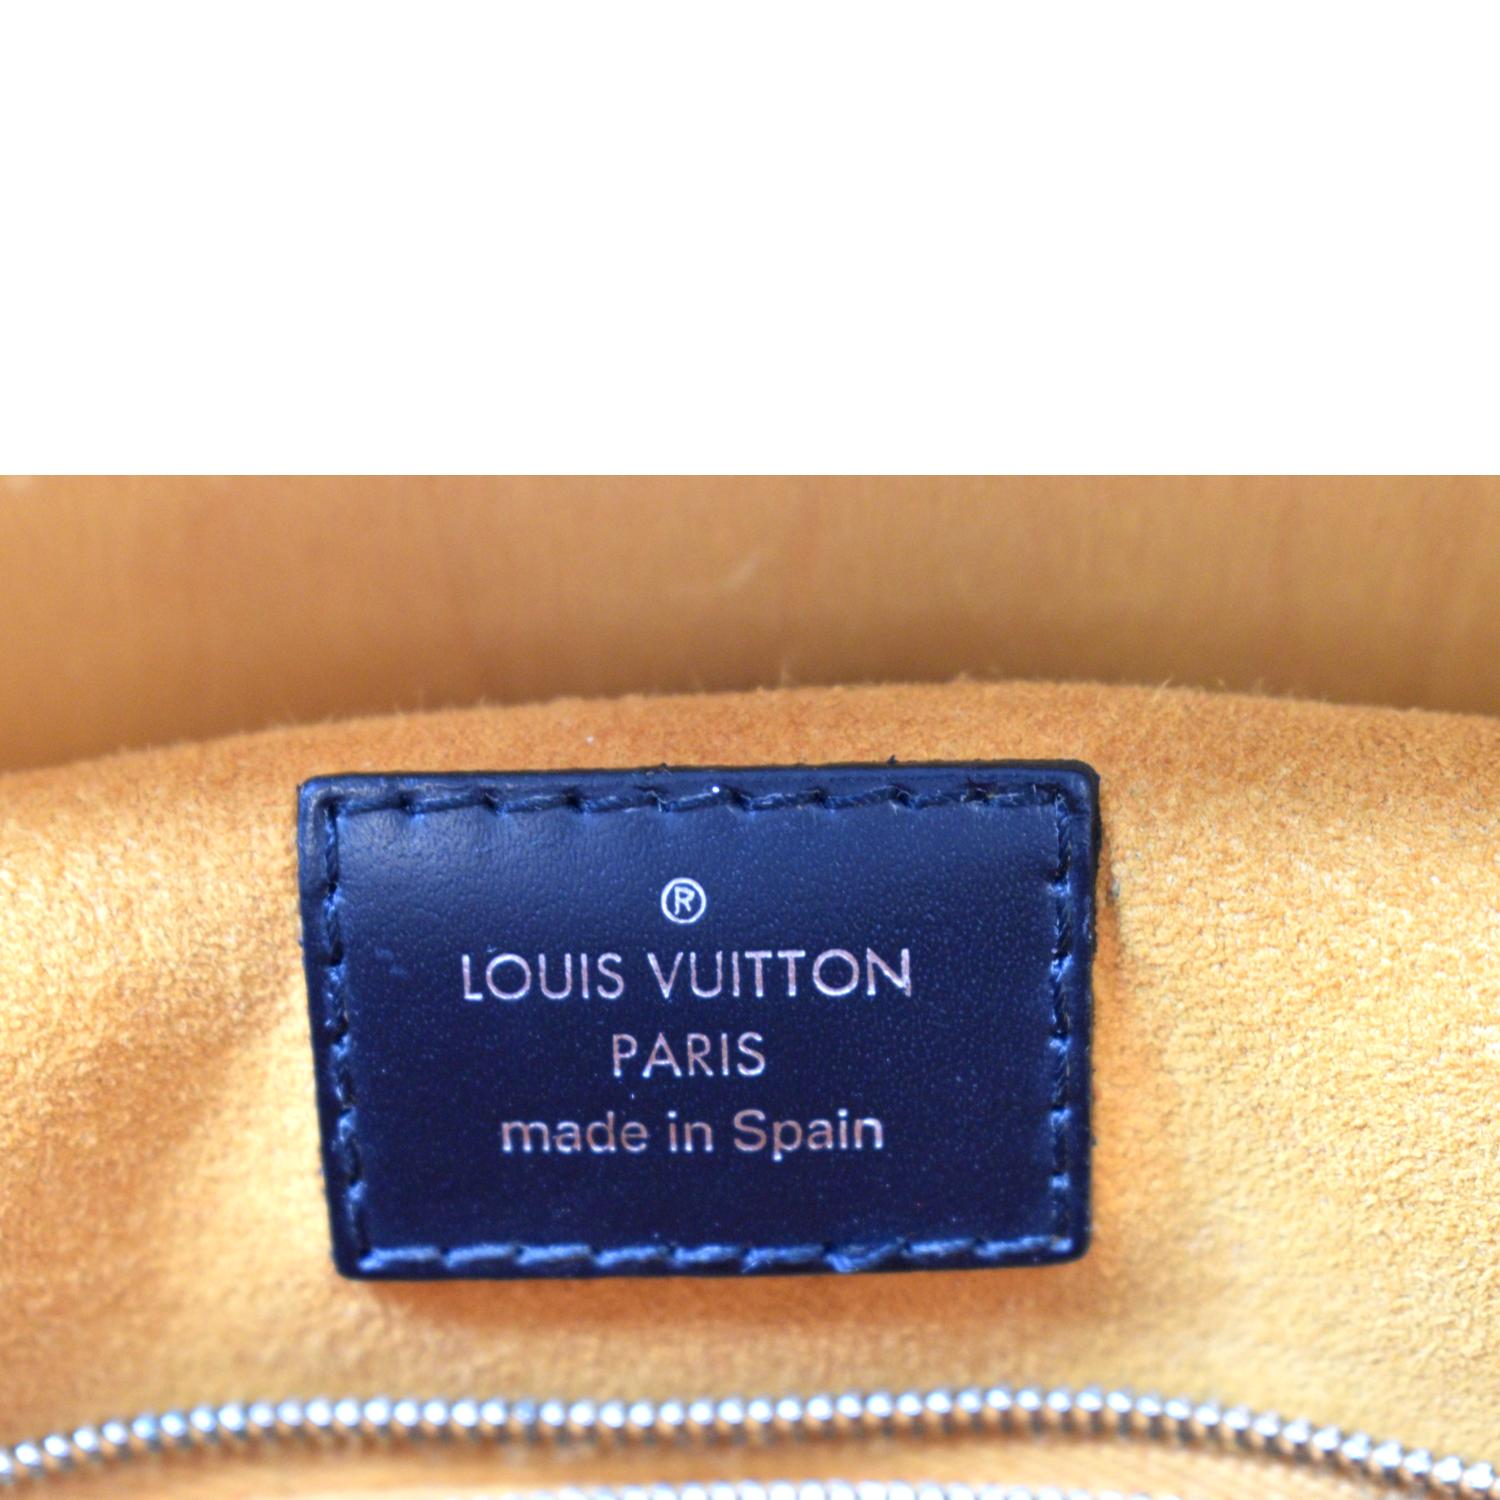 Louis Vuitton Grenelle bag in 2023